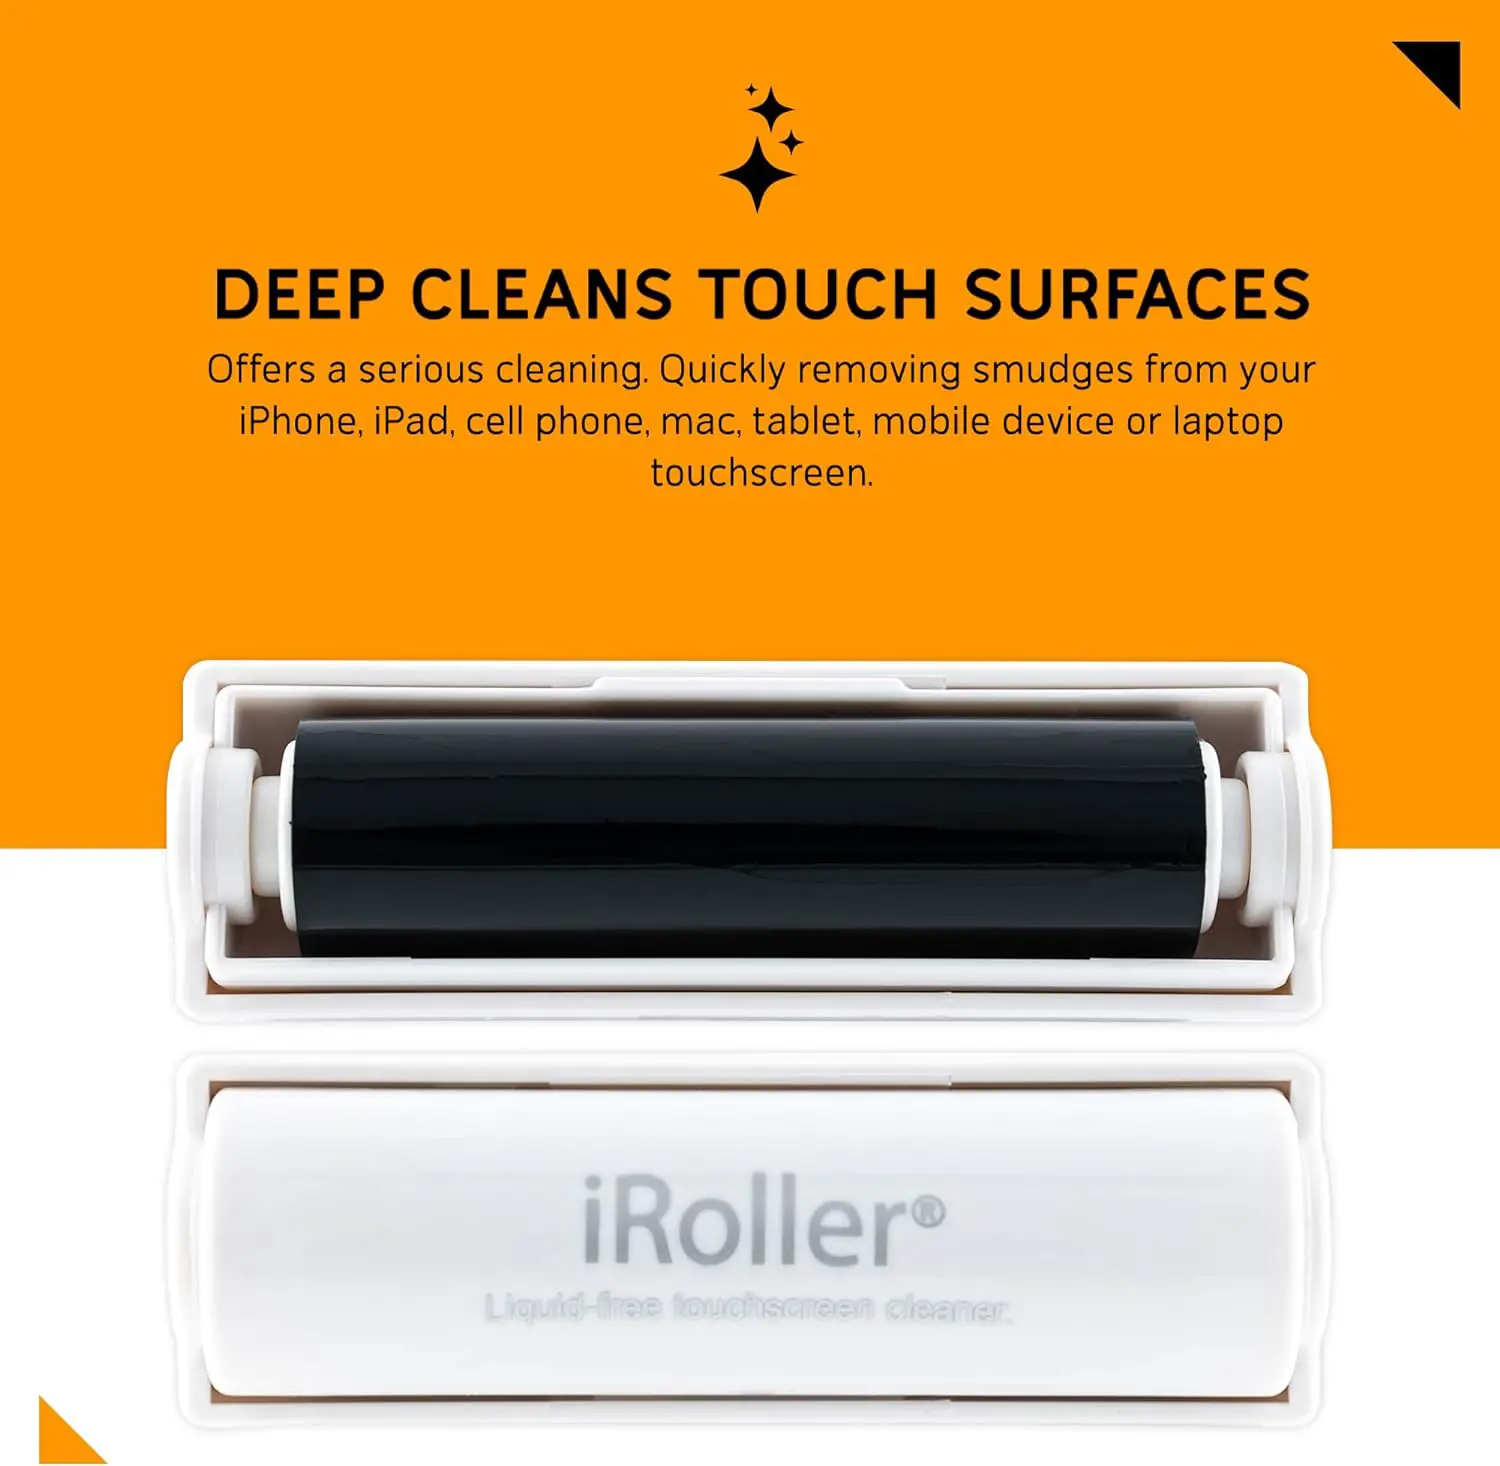 iRoller Premium Screen Cleaner, Reusable Non-Liquid, Non-Chemical Phone Cleaning Roller for iPhone, iPad, Laptop, MacBook, Computer Monitors, TV  Smartphones - No Wipes, Cloth or Spray Required